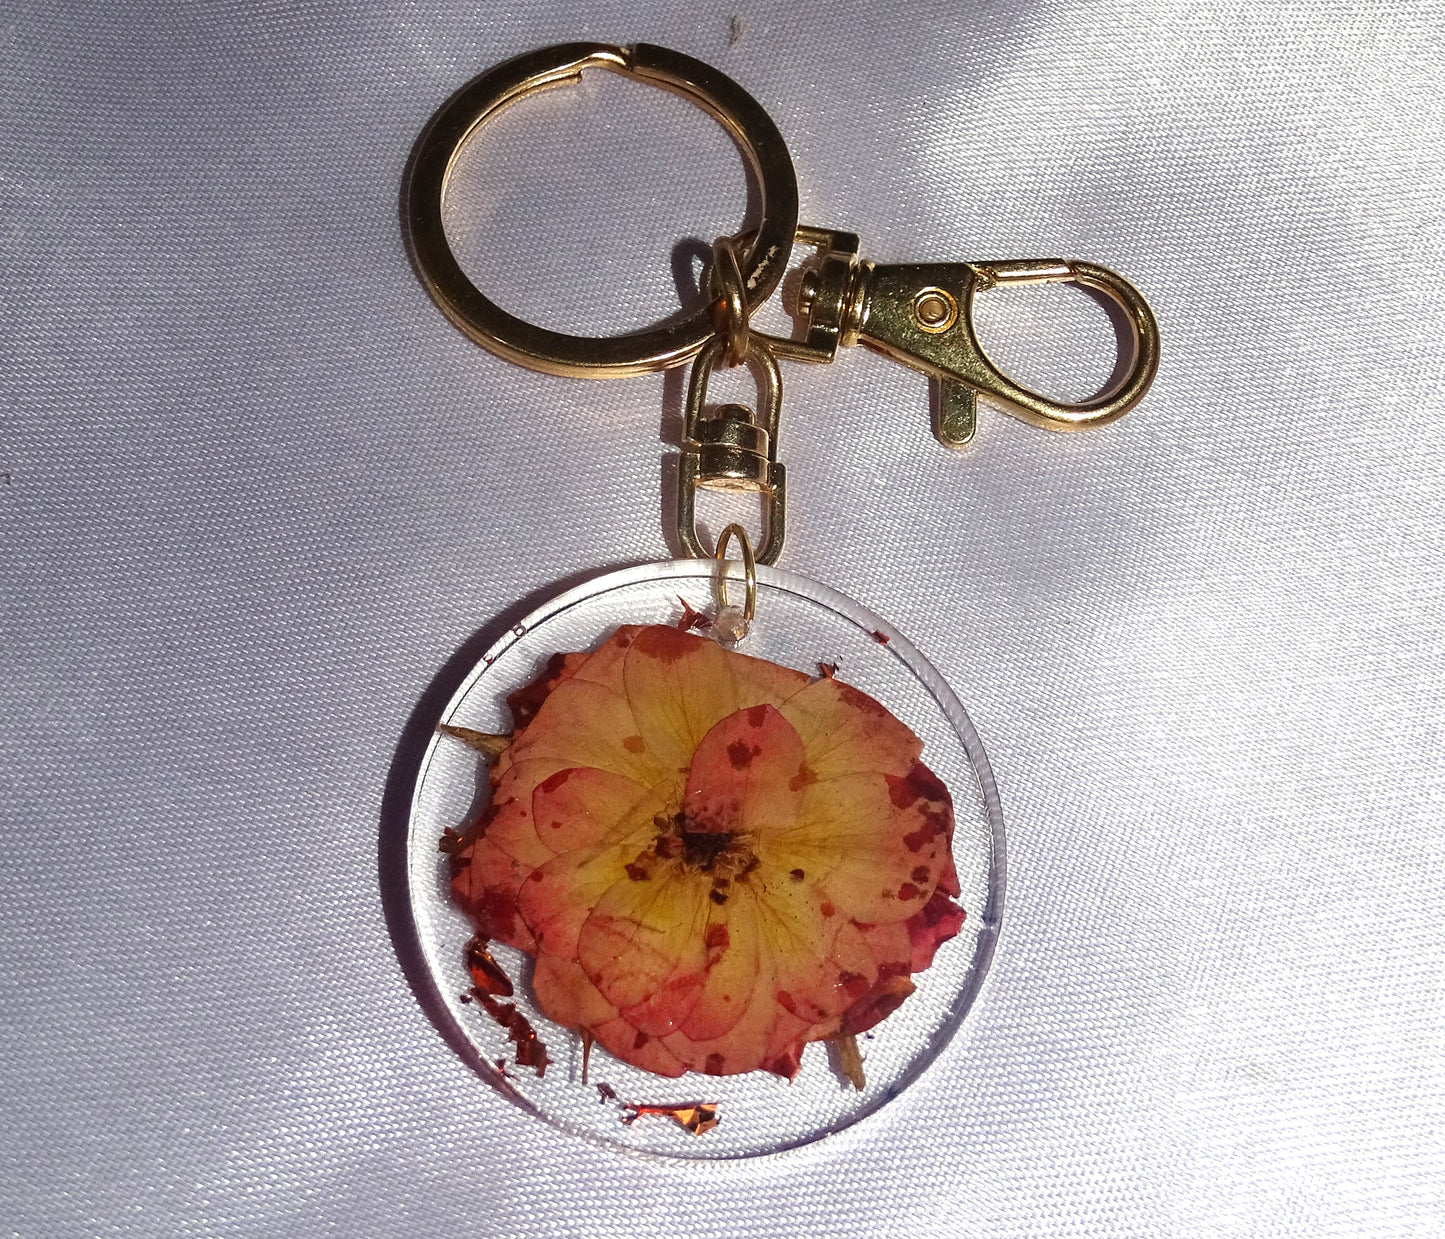 Elegance in your palm (Key Chains with Dried Flowers)